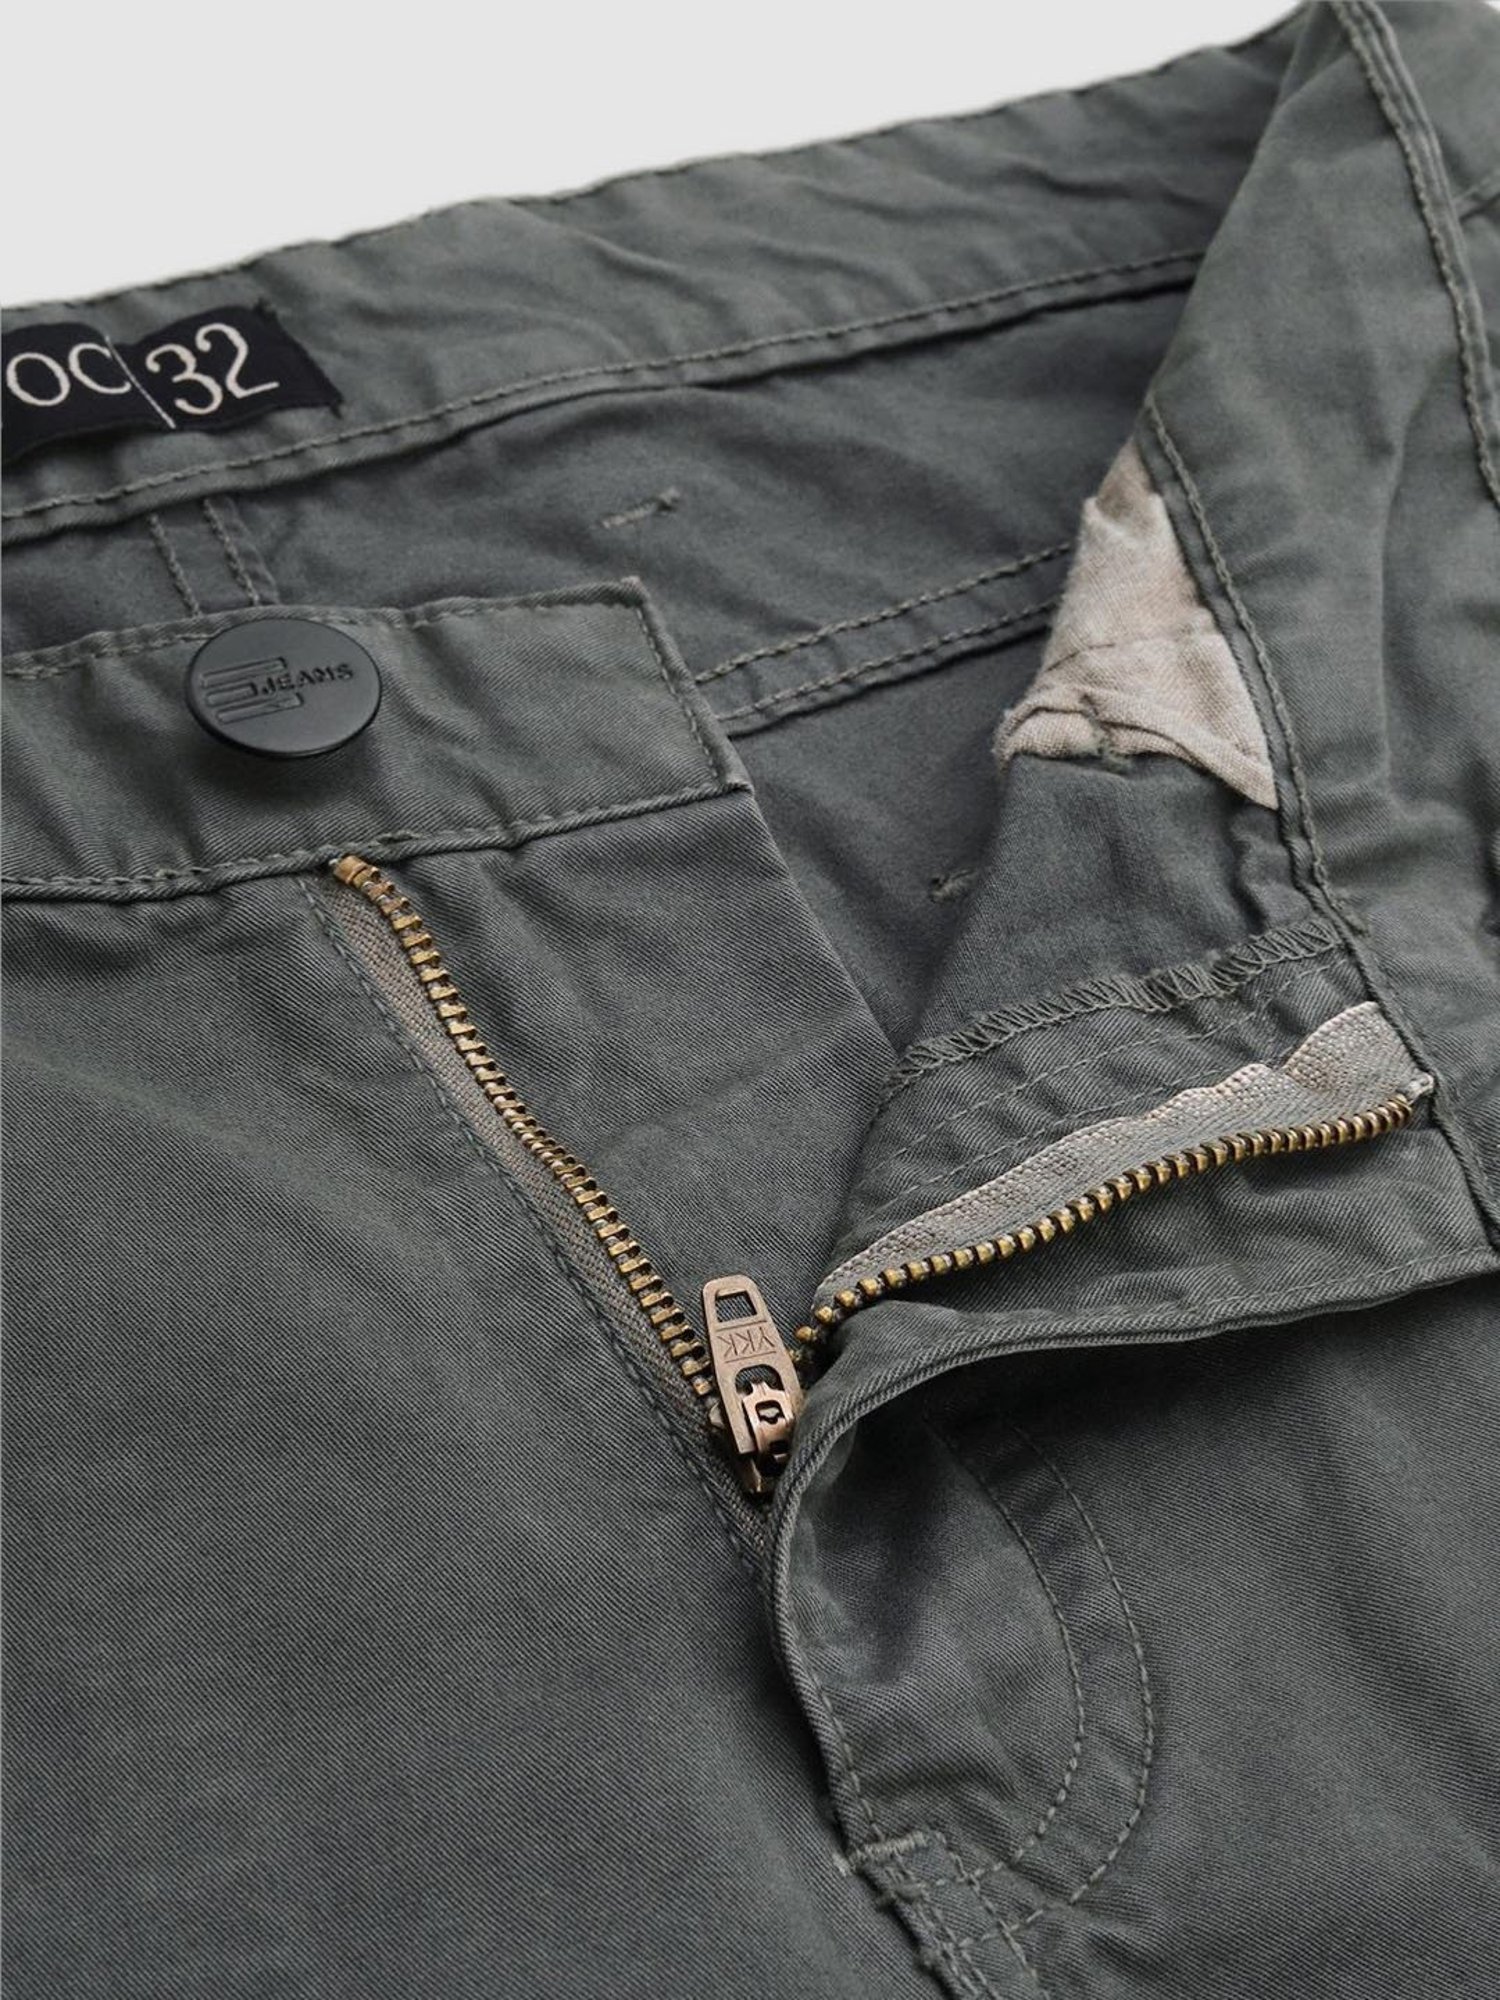 Buy Grey Trousers & Pants for Men by iVOC Online